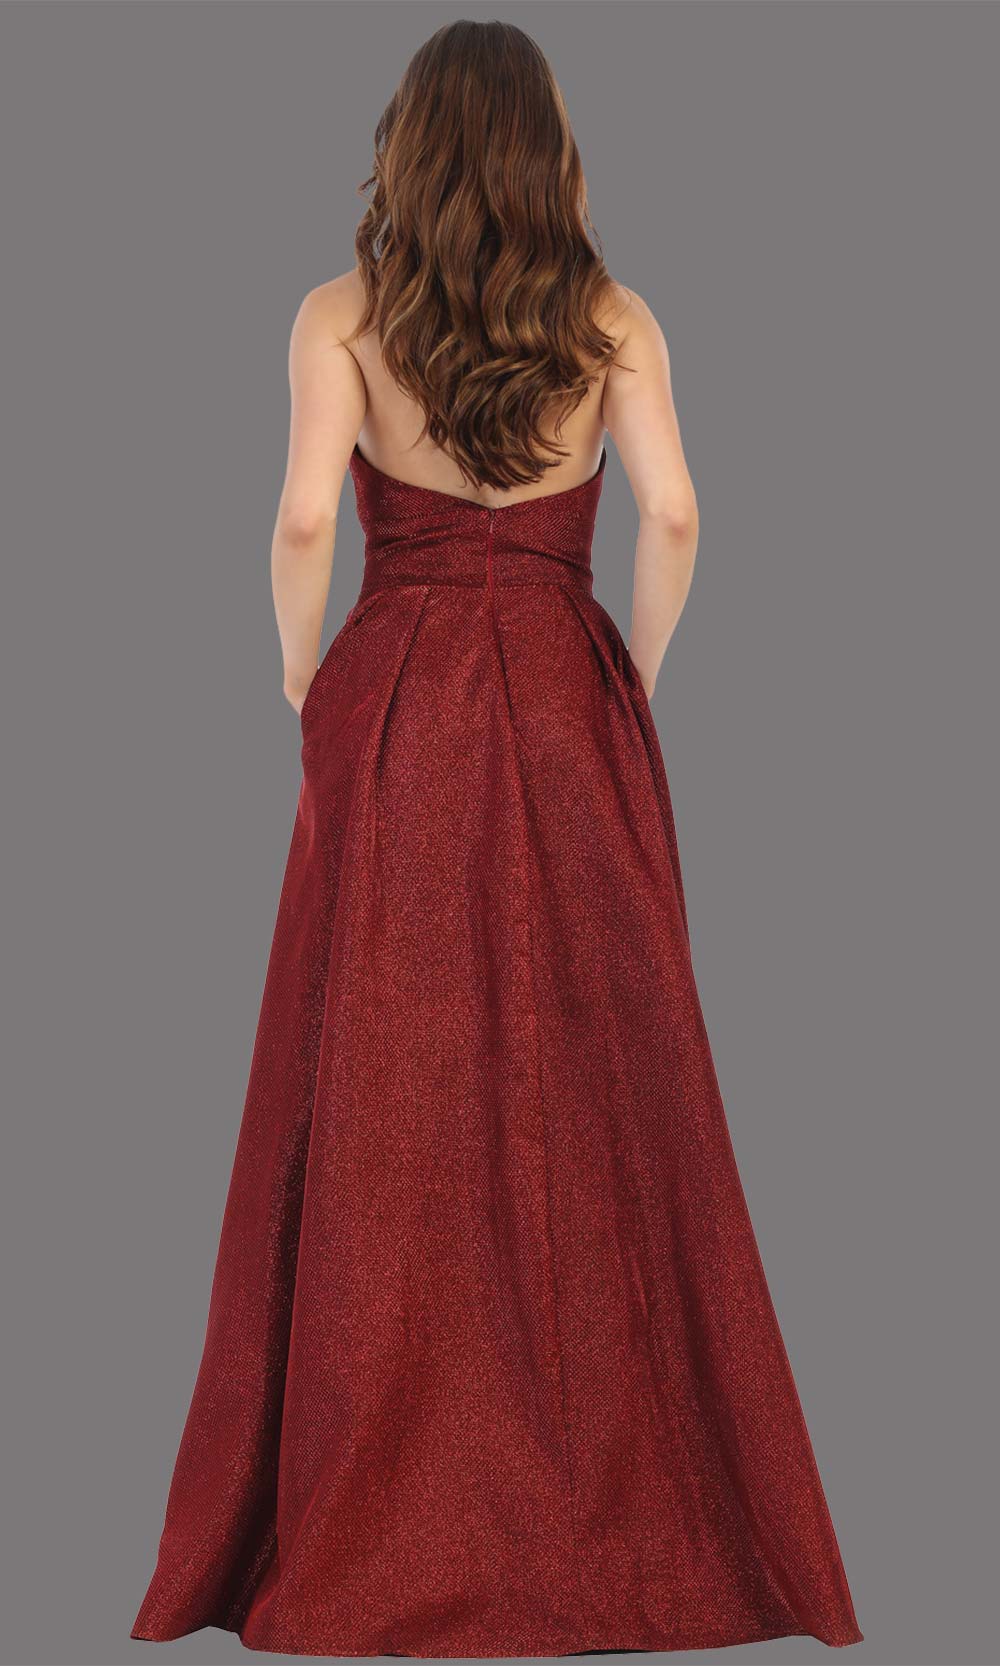 Mayqueen MQ1710 long burgundy metallic strapless flowy dress with pockets.This dark red a-line semi ballgown is perfect for prom, engagement dress, wedding reception dress, quinceanera, debut, sweet 16, formal wedding guest. Plus sizes are available-b